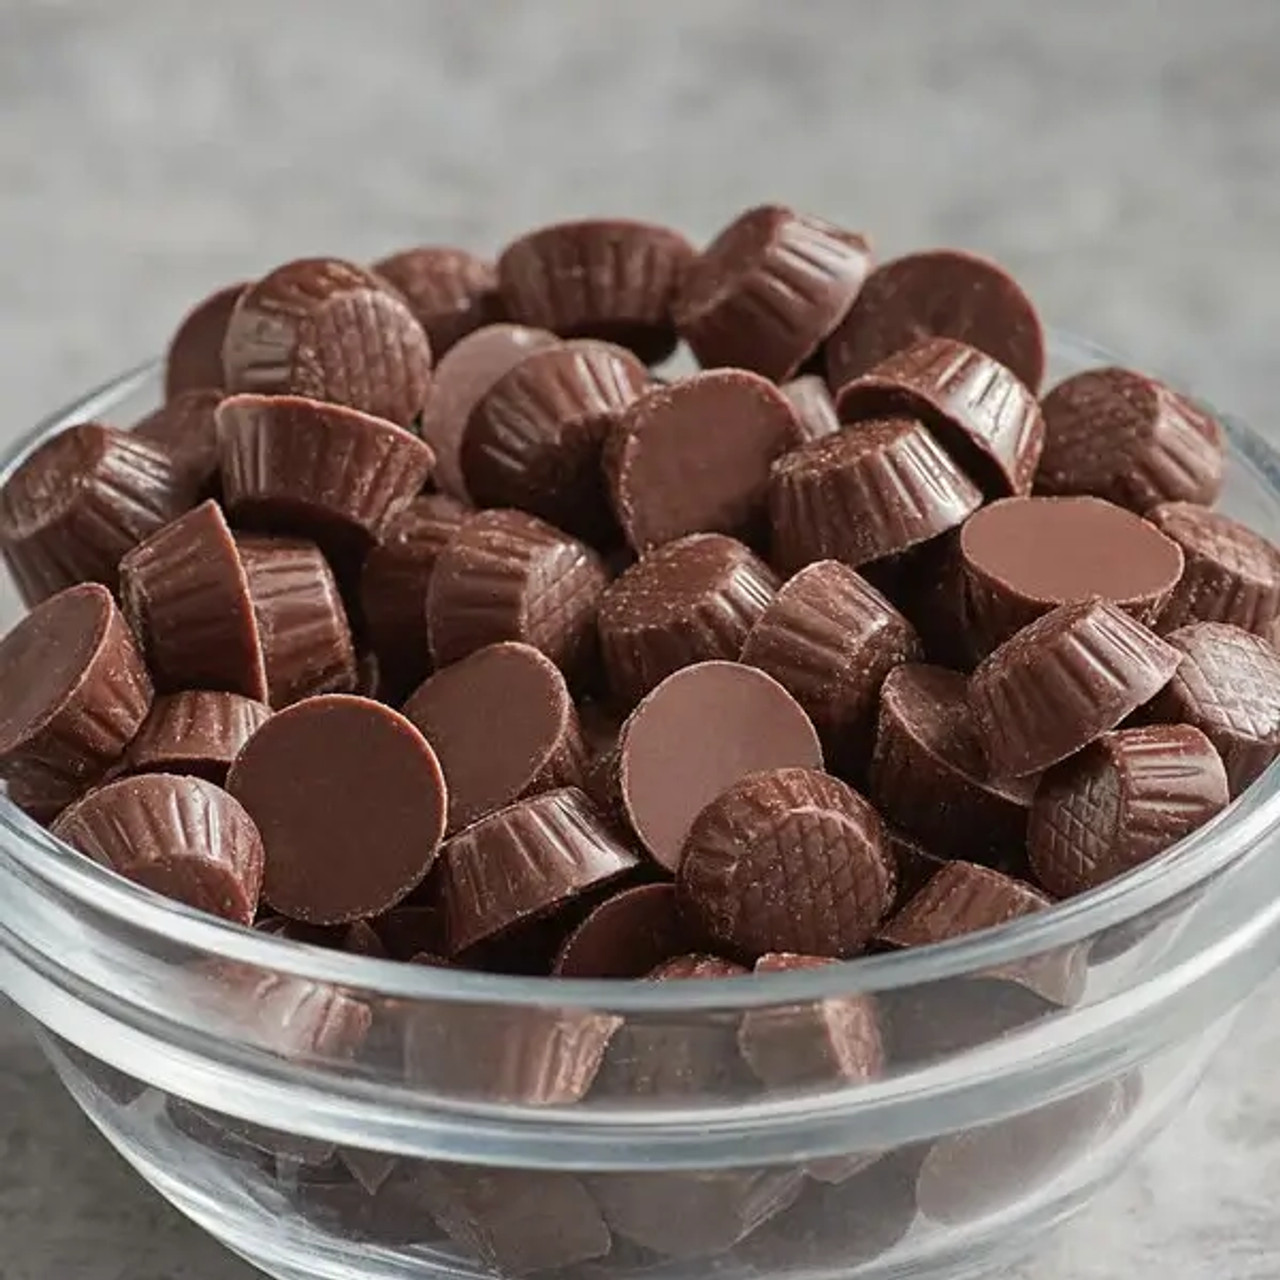 TOPPERS Mini Milk Chocolate Peanut Butter Cup Topping - 10 lb Bag | Whole Candy - Chicken Pieces